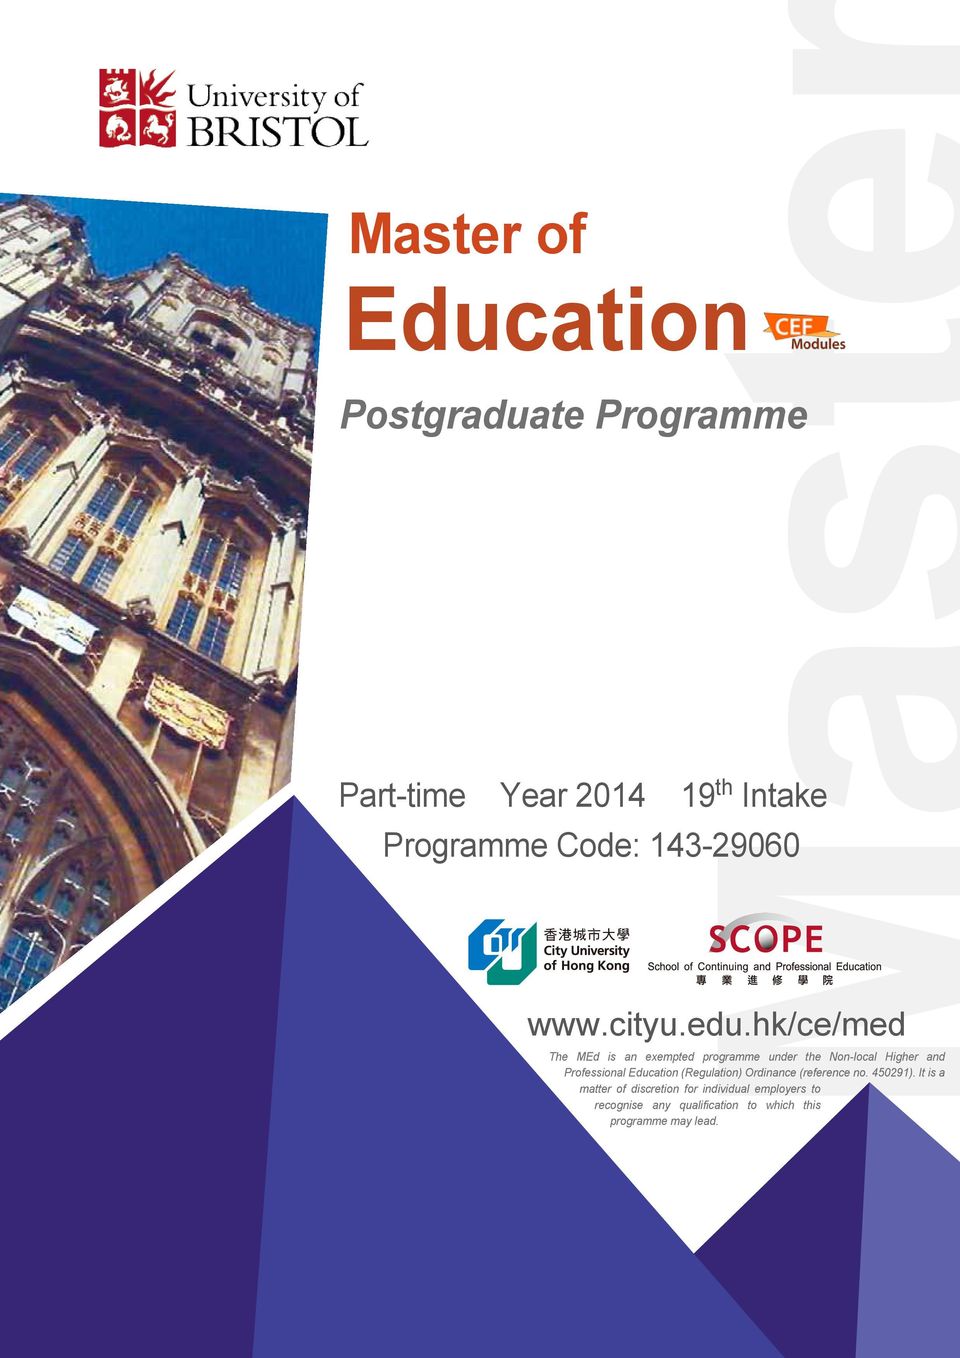 hk/ce/med The MEd is an exempted programme under the Non-local Higher and Professional